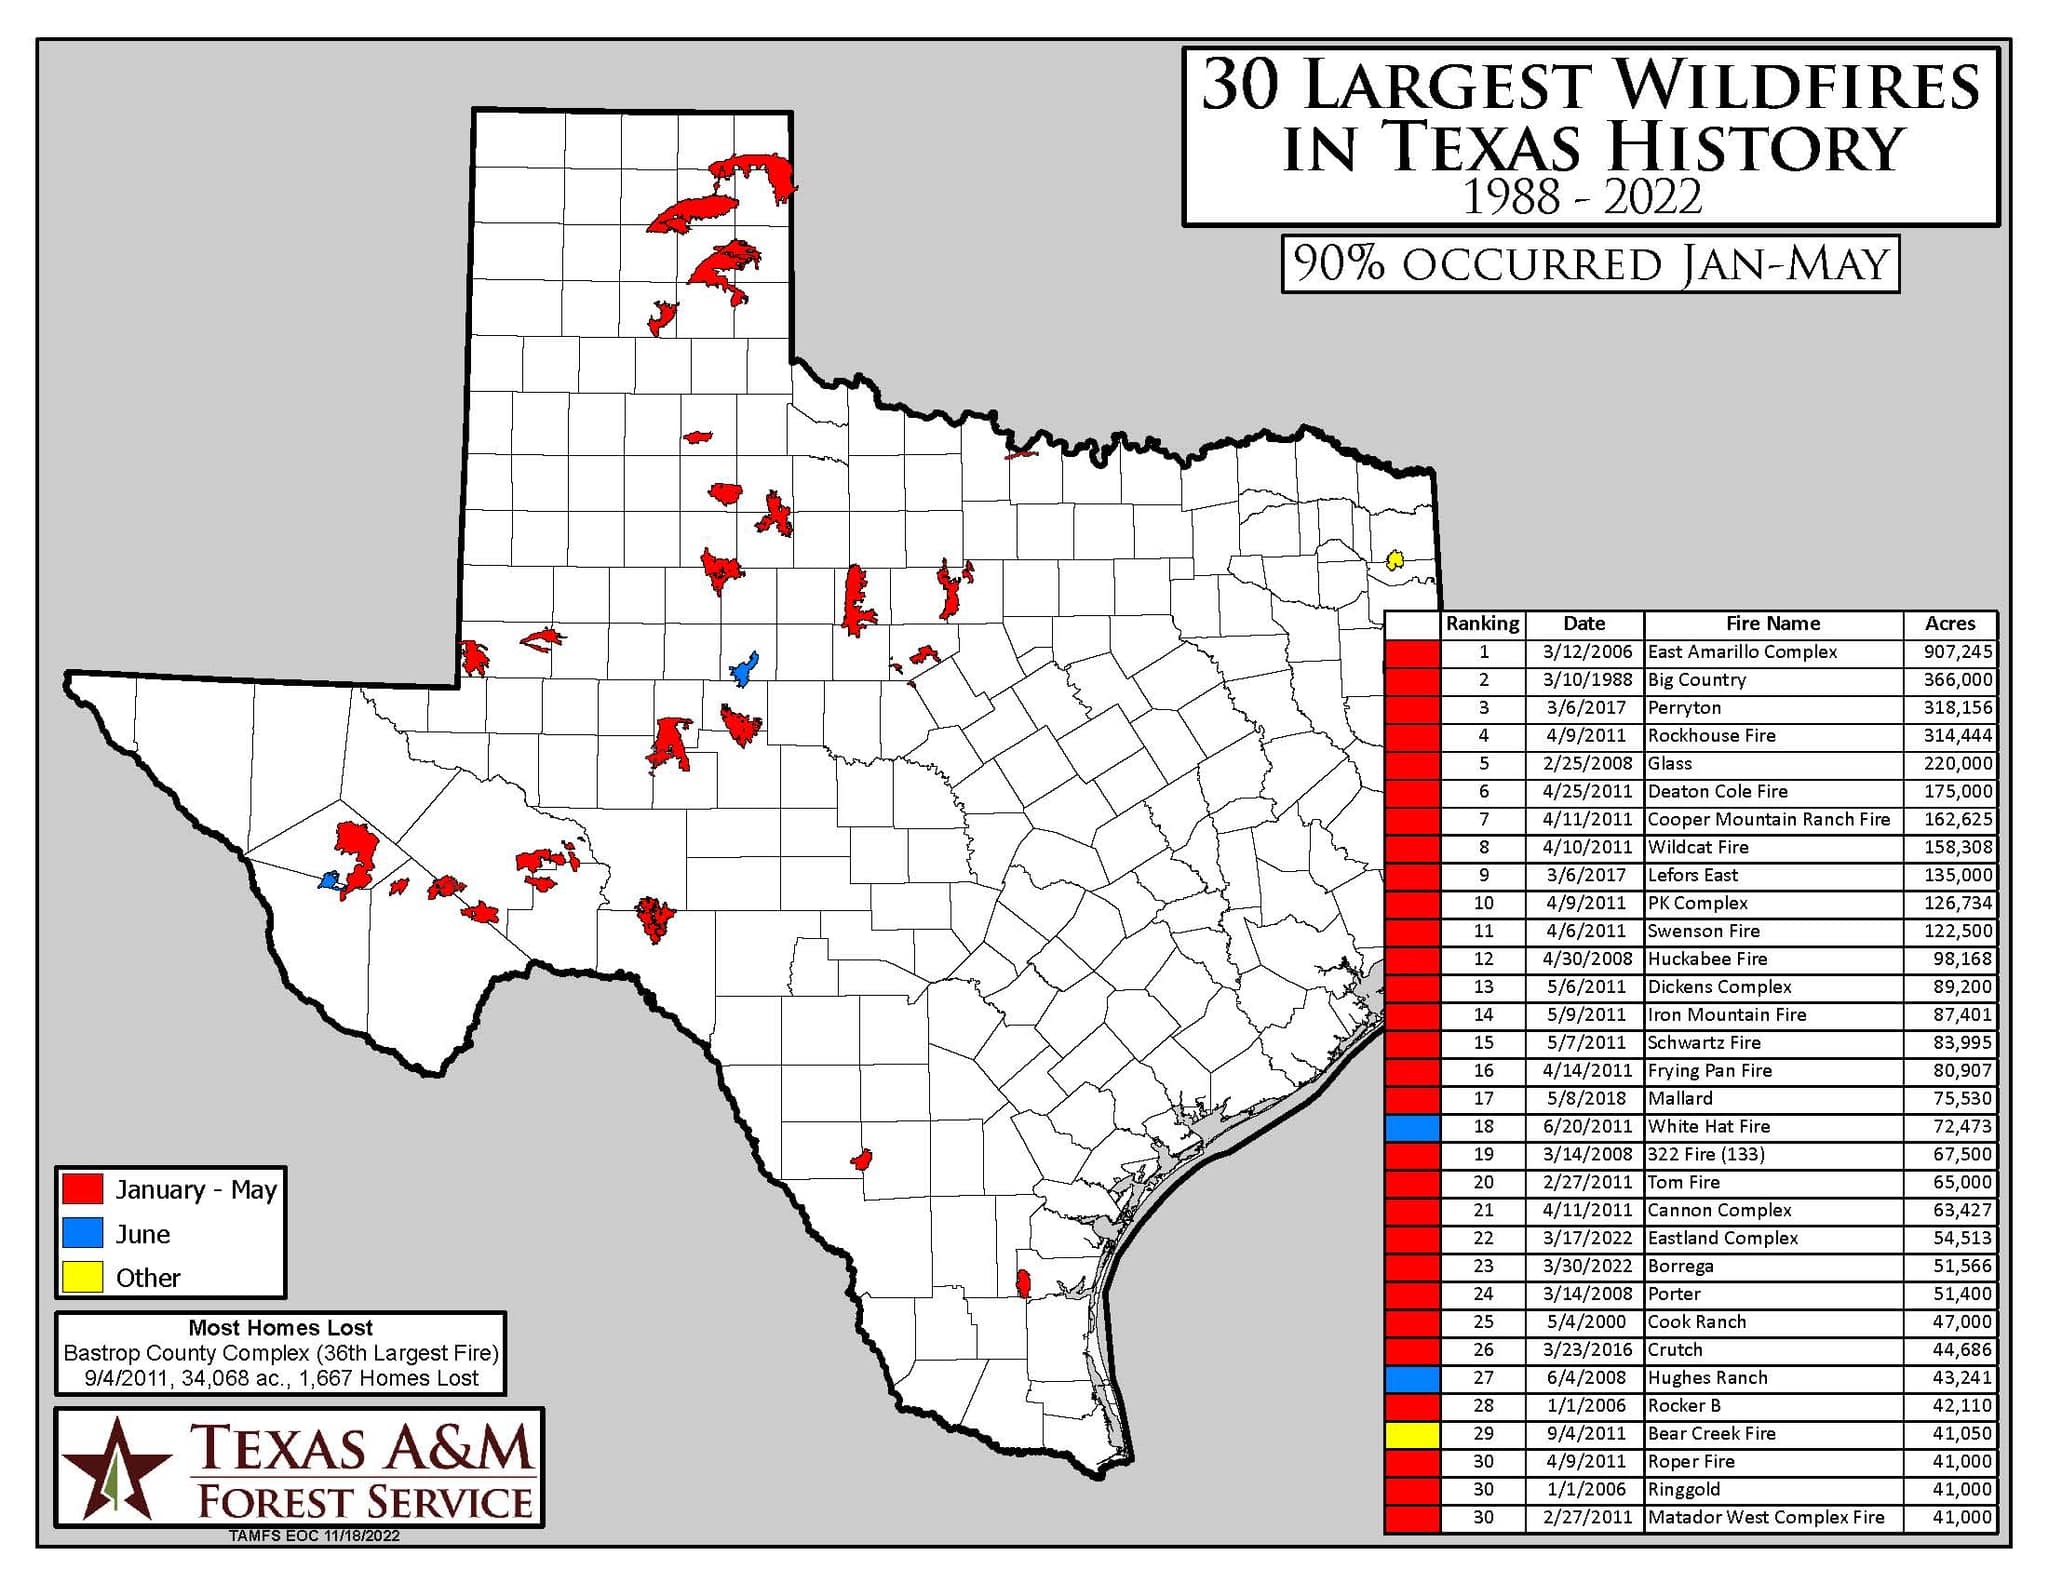 30 largest wildfires in Texas History.